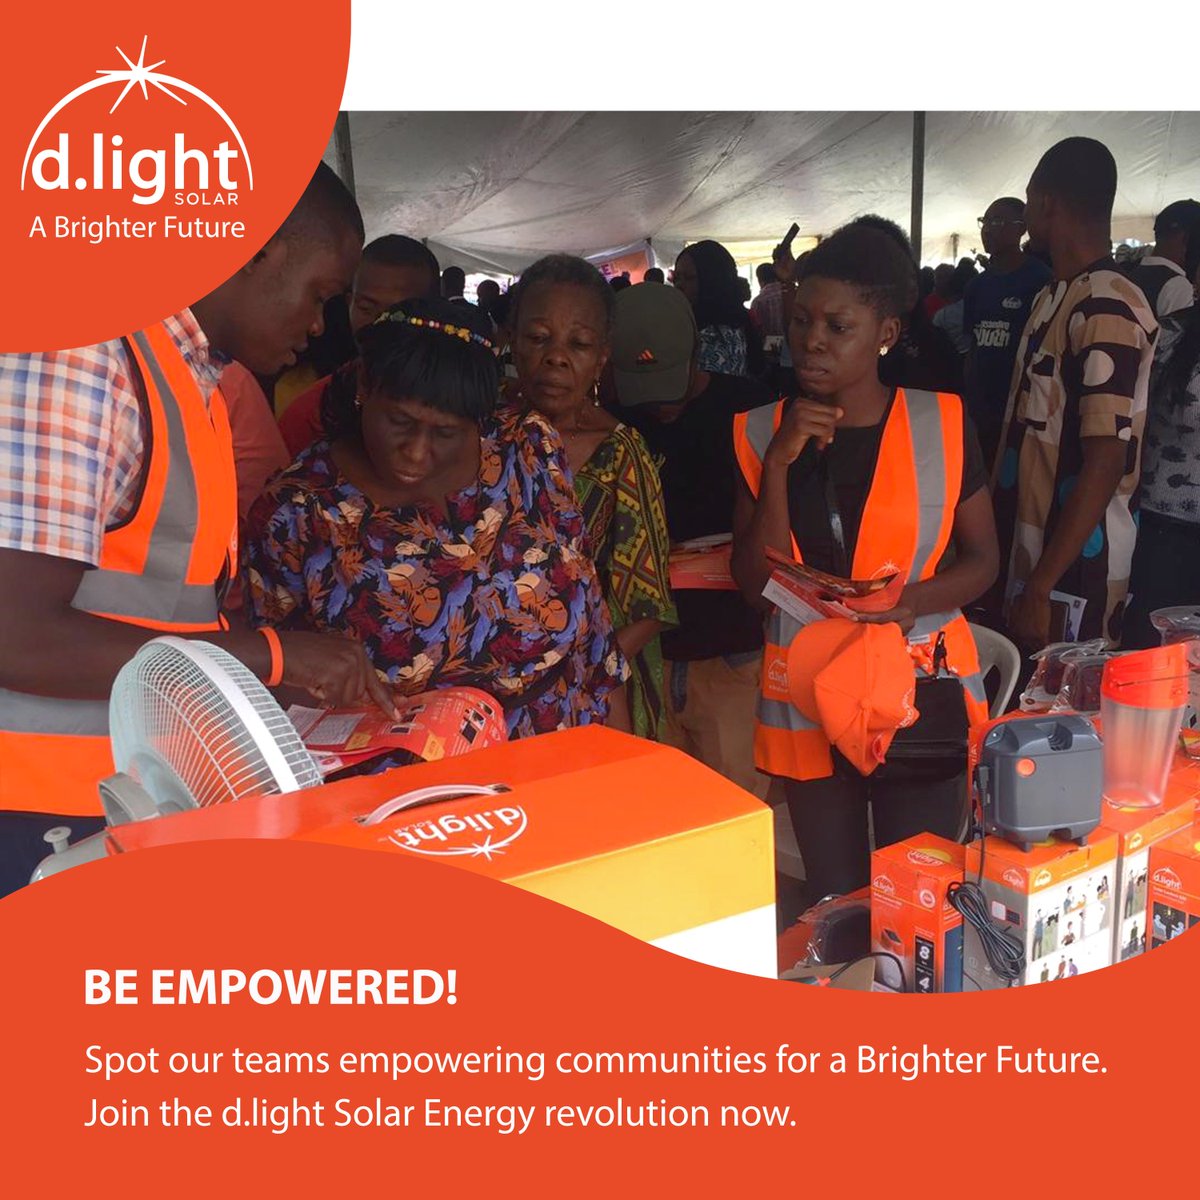 Make it yours today! 
Discover why over 95 million people around the world rely on d.light solar products to live A Brighter Future.

Customer Care (Toll-free):08000354448

#abrighterfuture #dlightsolar #solarenergy #africa #solarsystem #nigeria #solar #solarchampions #empowered